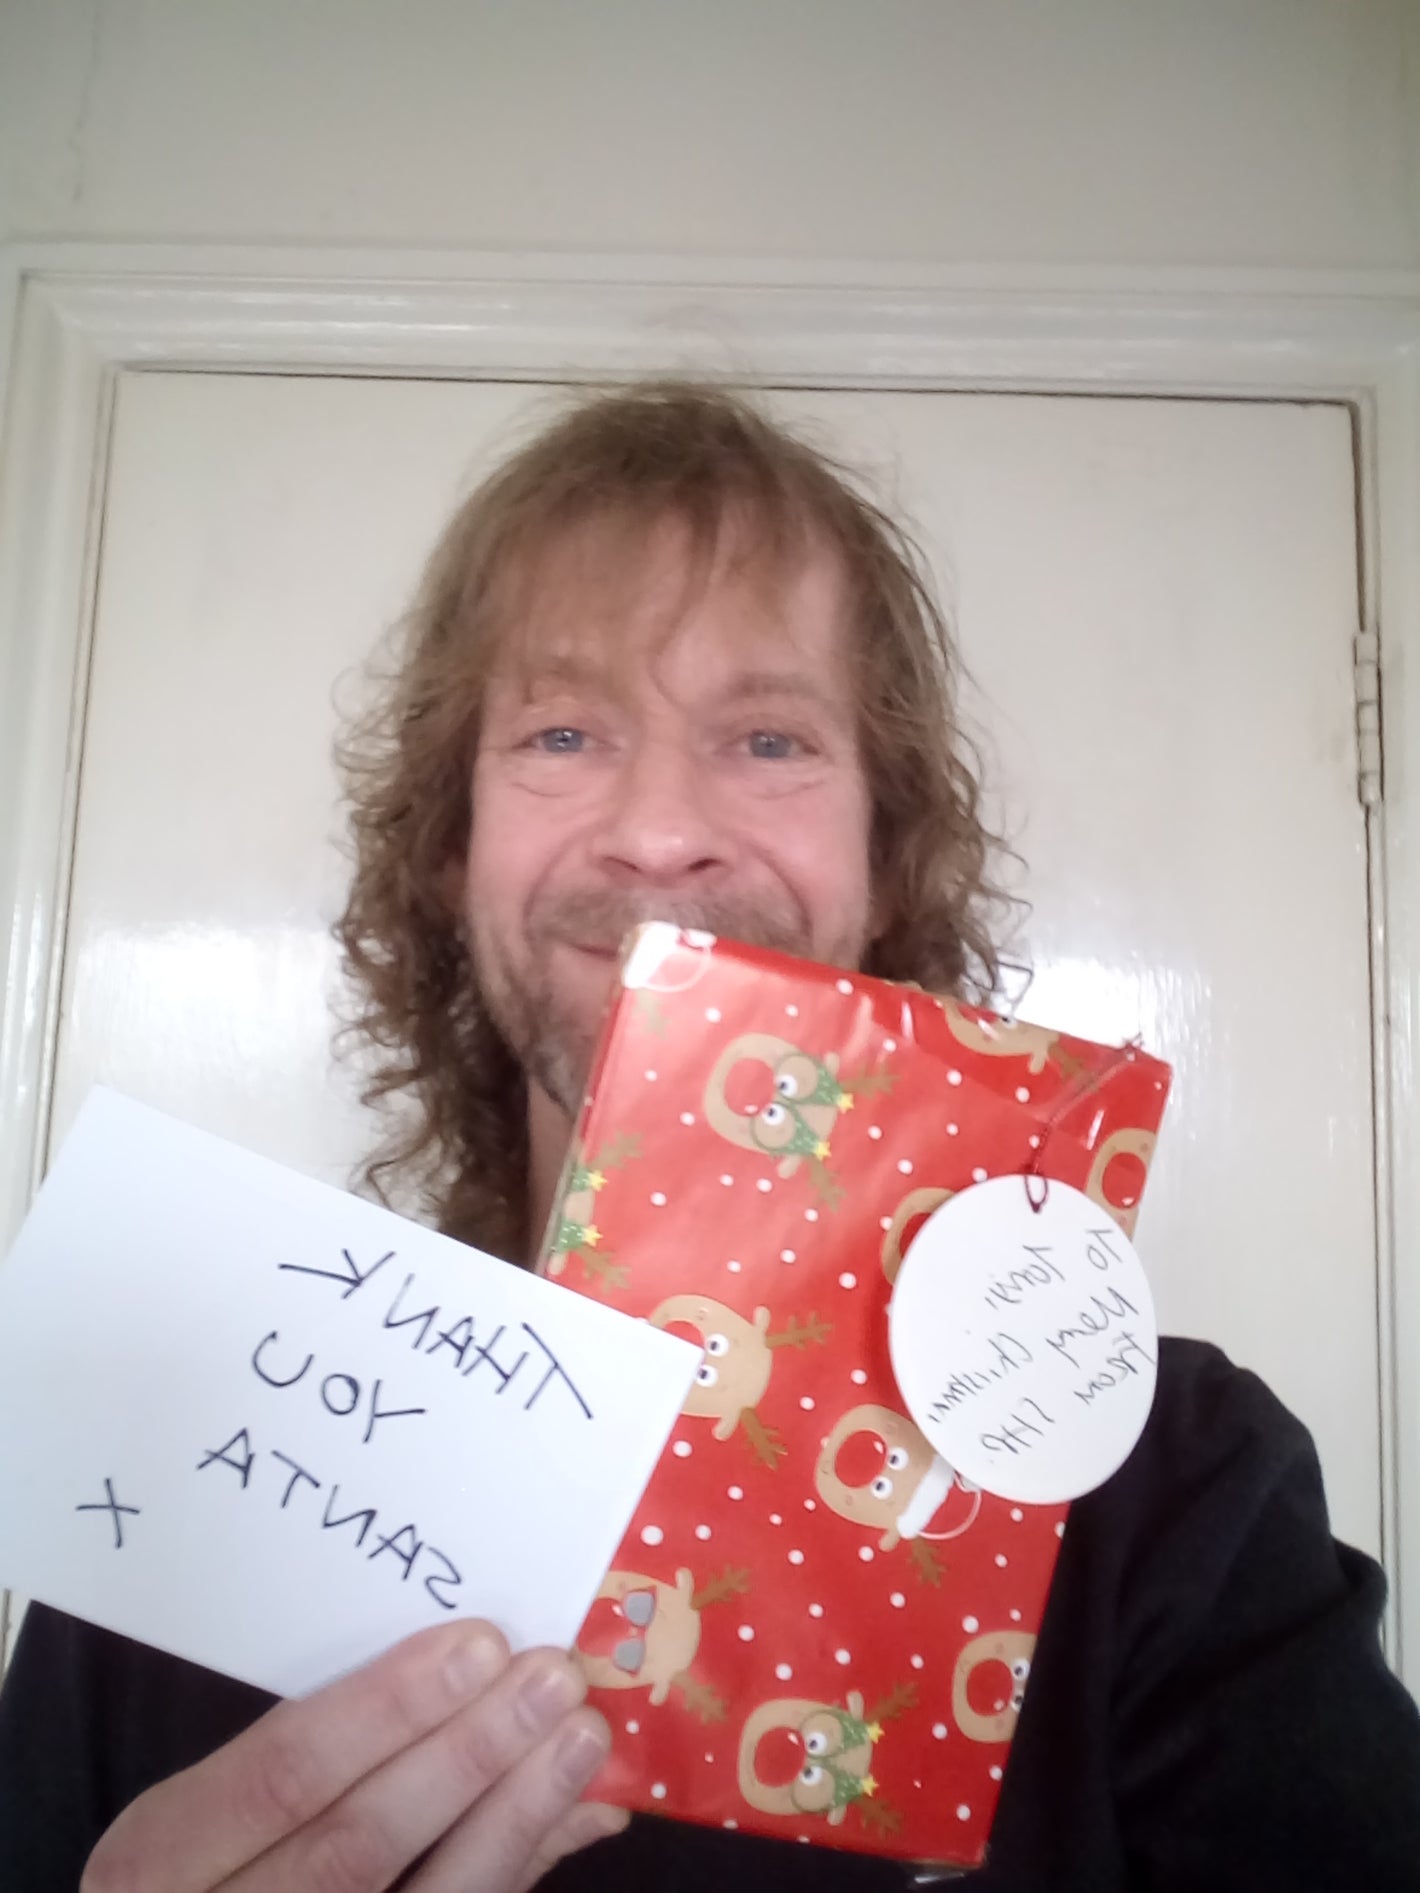 Man smiling holding a Christmas gift and a card.